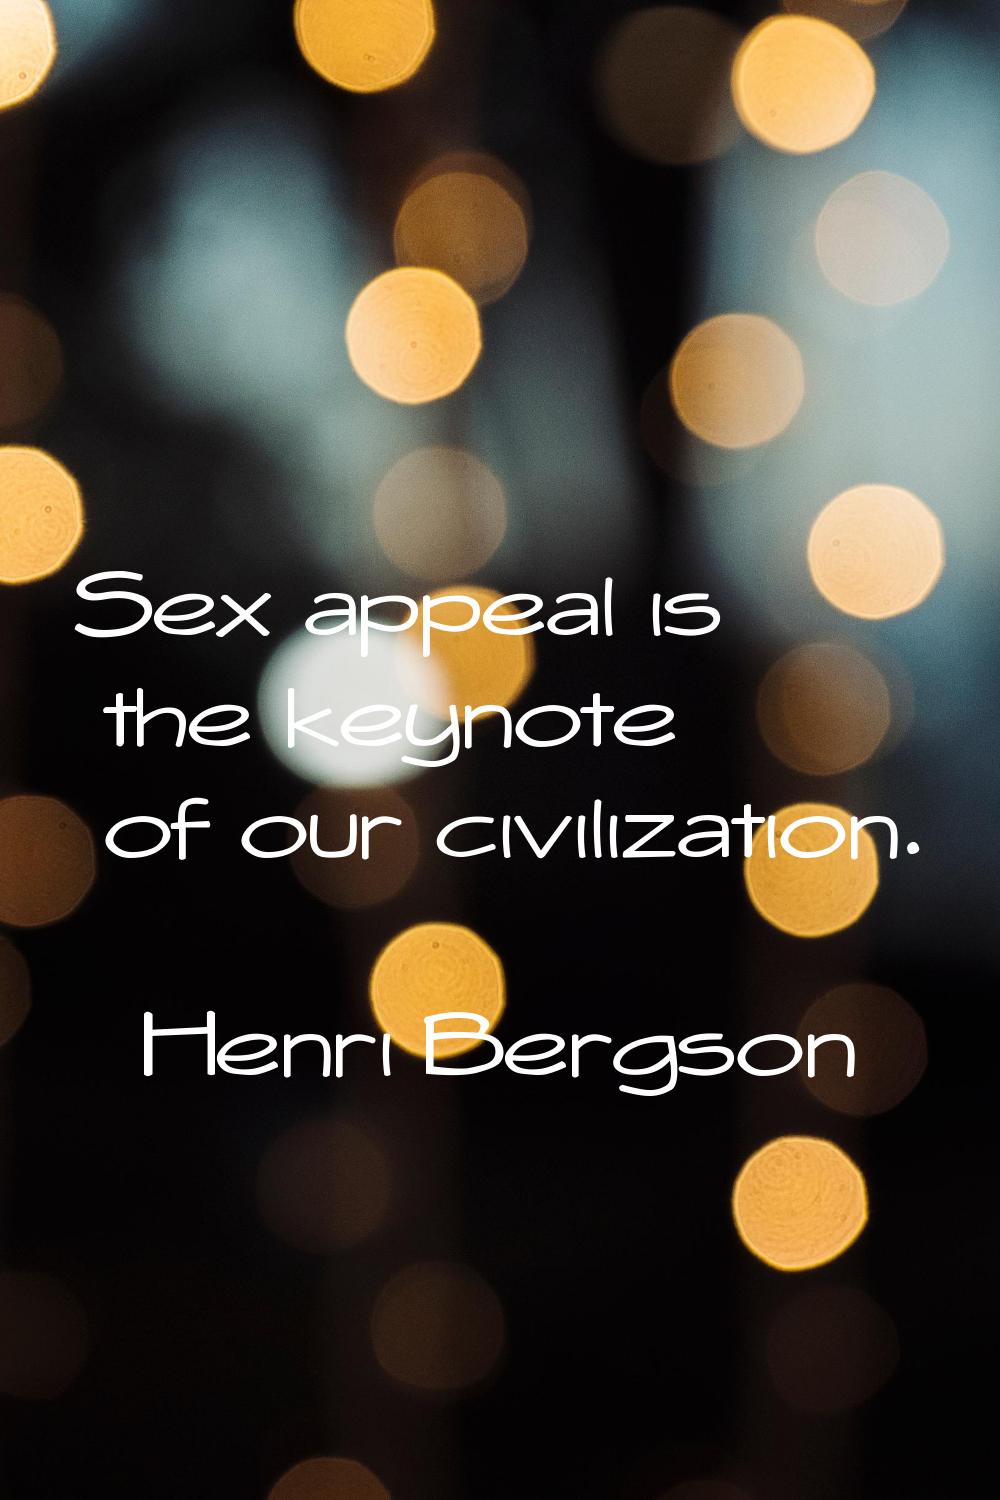 Sex appeal is the keynote of our civilization.